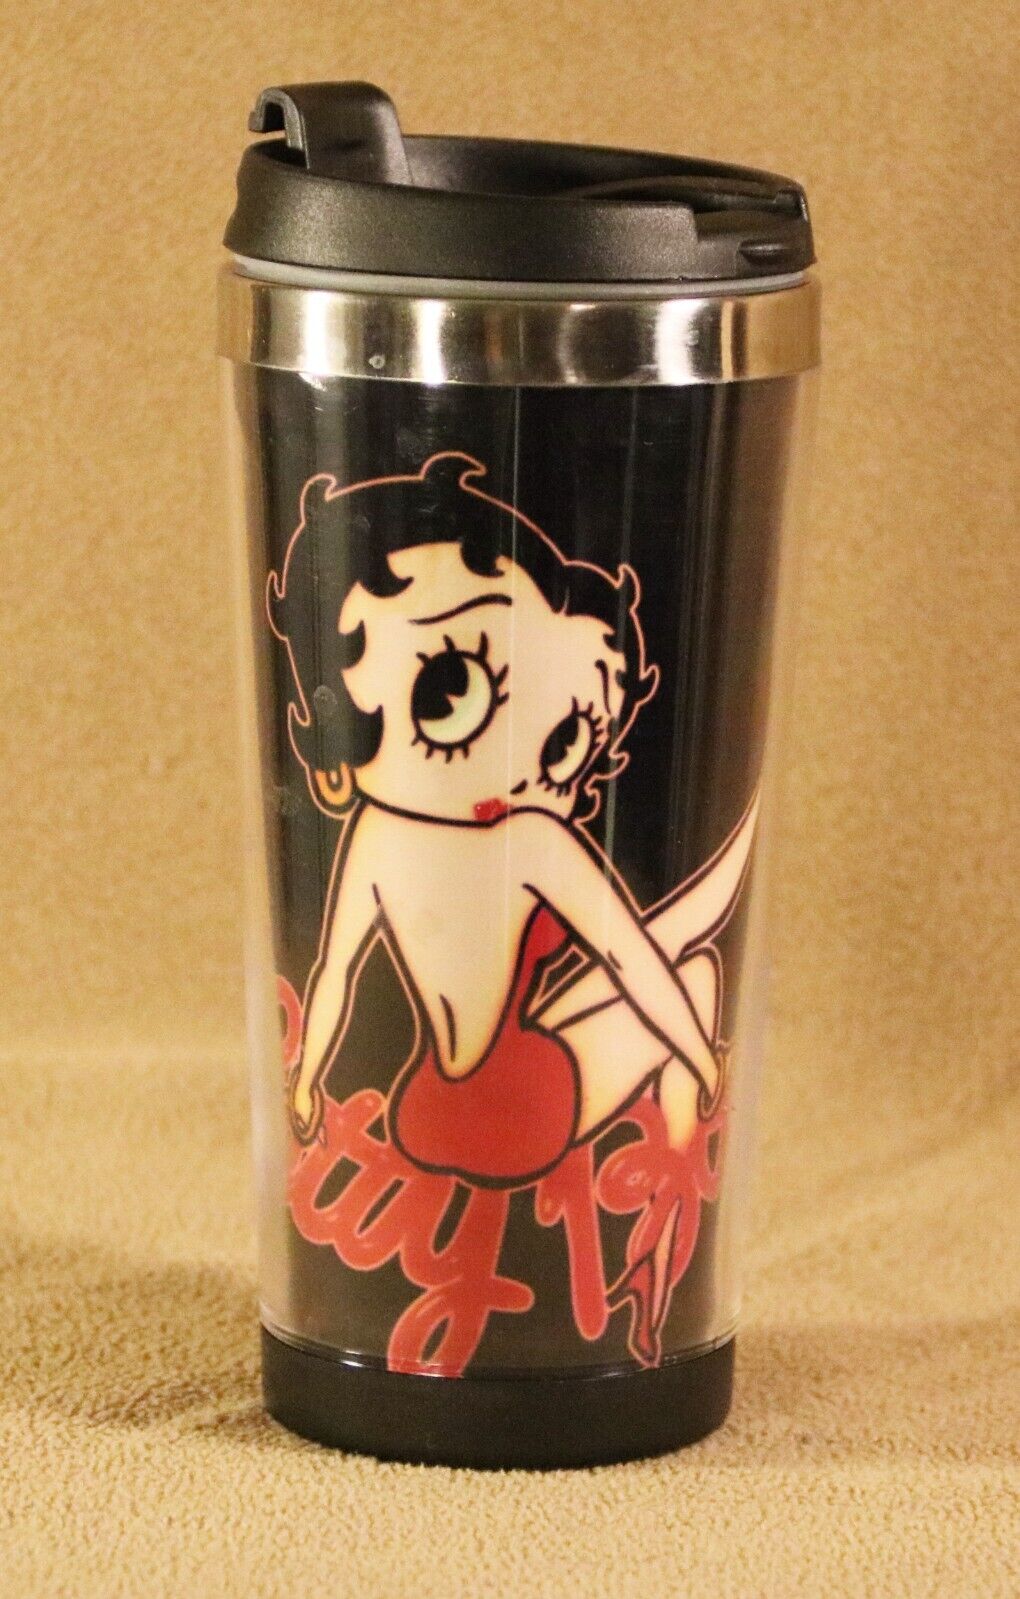 Betty Boop 16oz Travel Mug Black See pictures and description